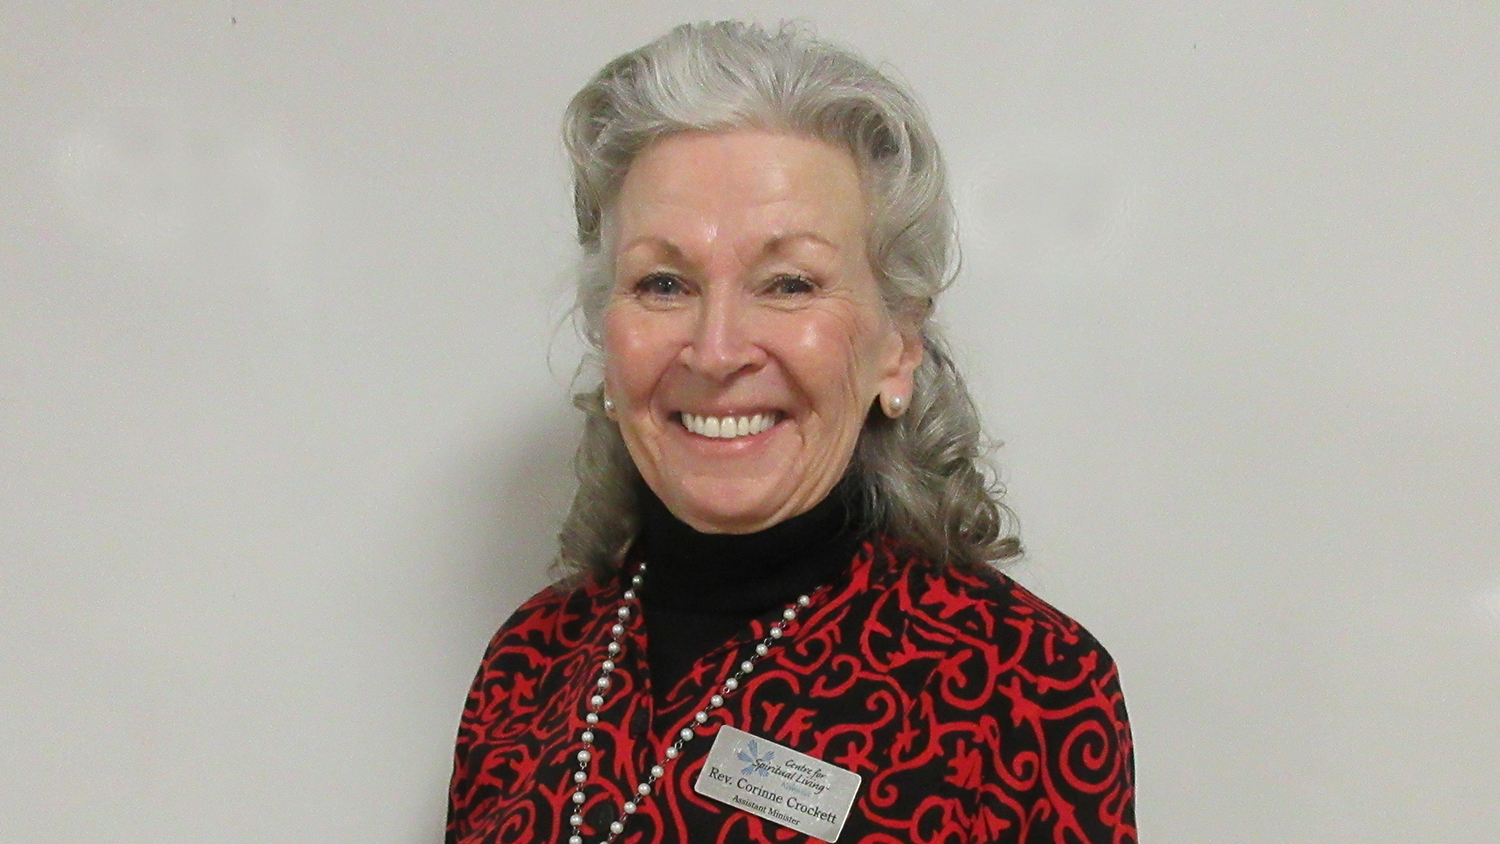 A smiling person with silver-coloured hair poses for a picture. They're wearing a patterned black and red shirt and a pearl necklace.